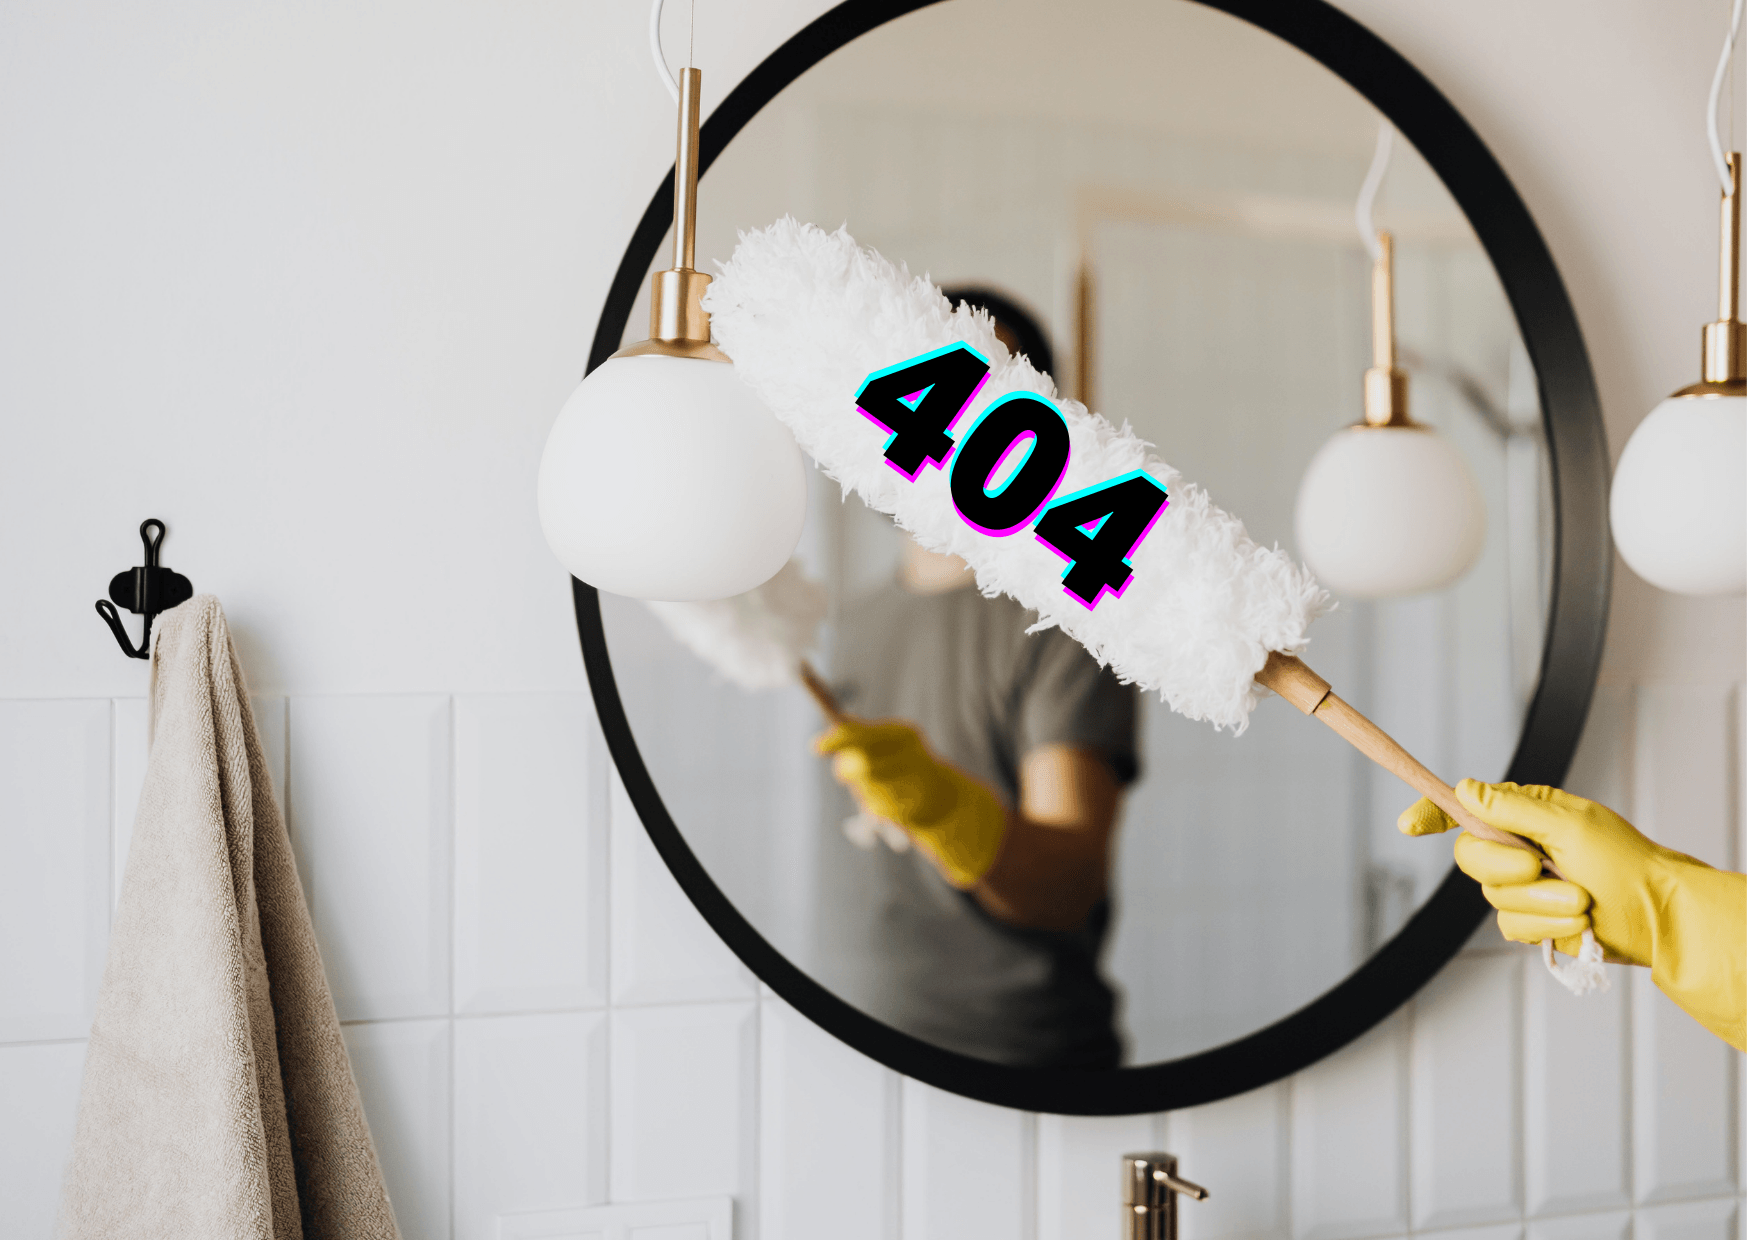 404 page showing a mirror being dusted